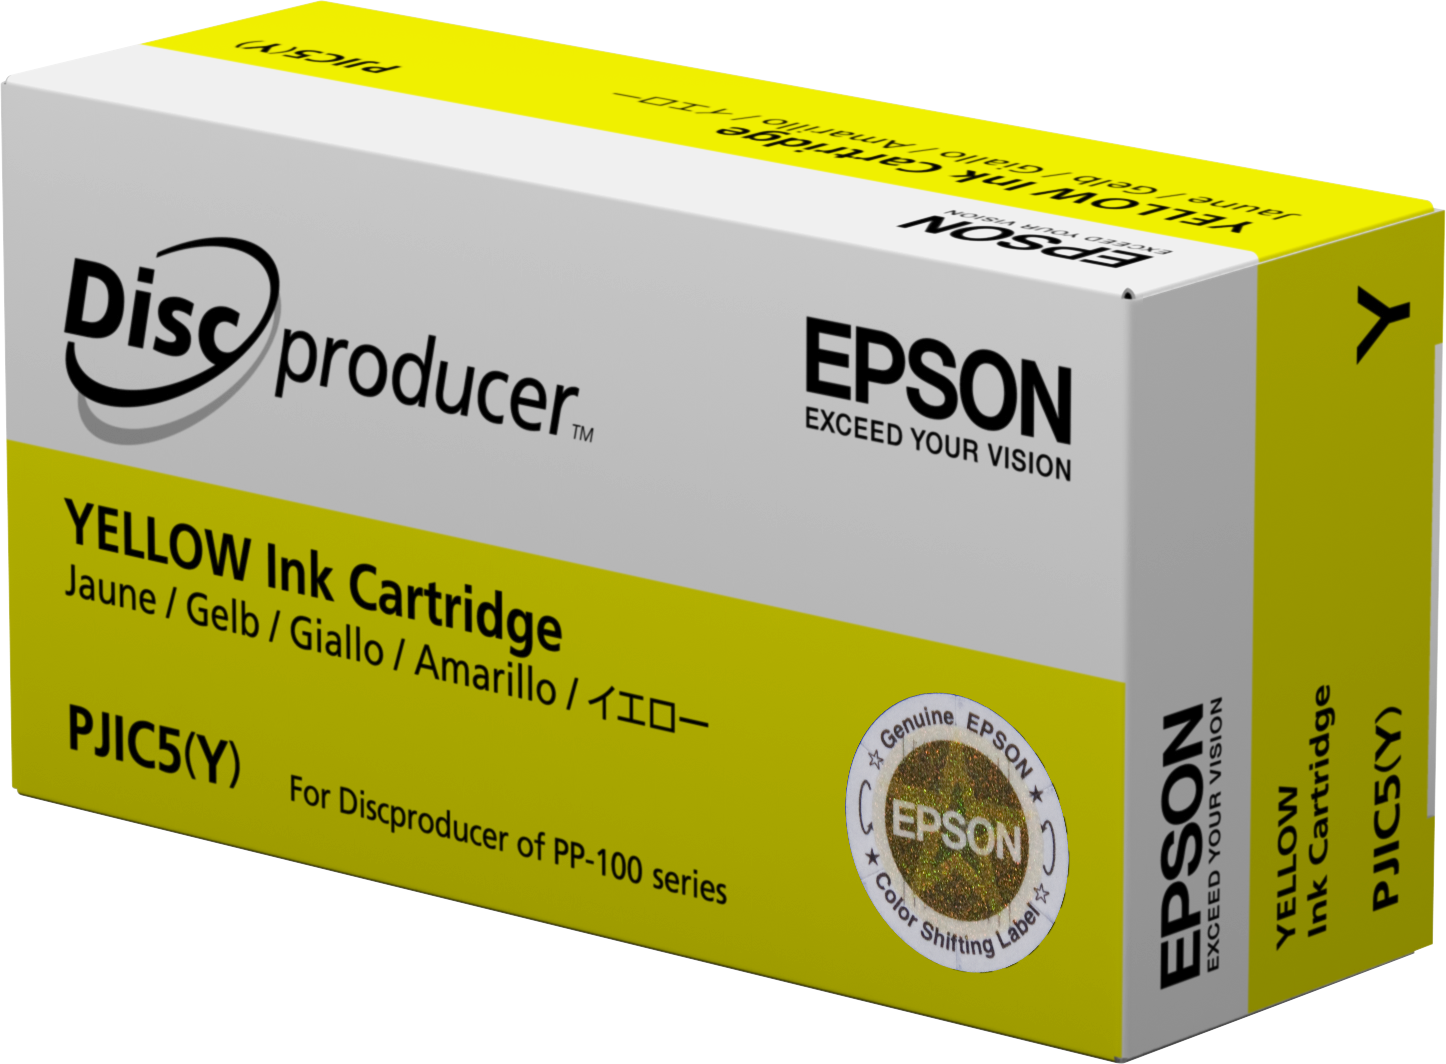 Epson Discproducer Ink PJIC7(Y), Yellow (MOQ=10)